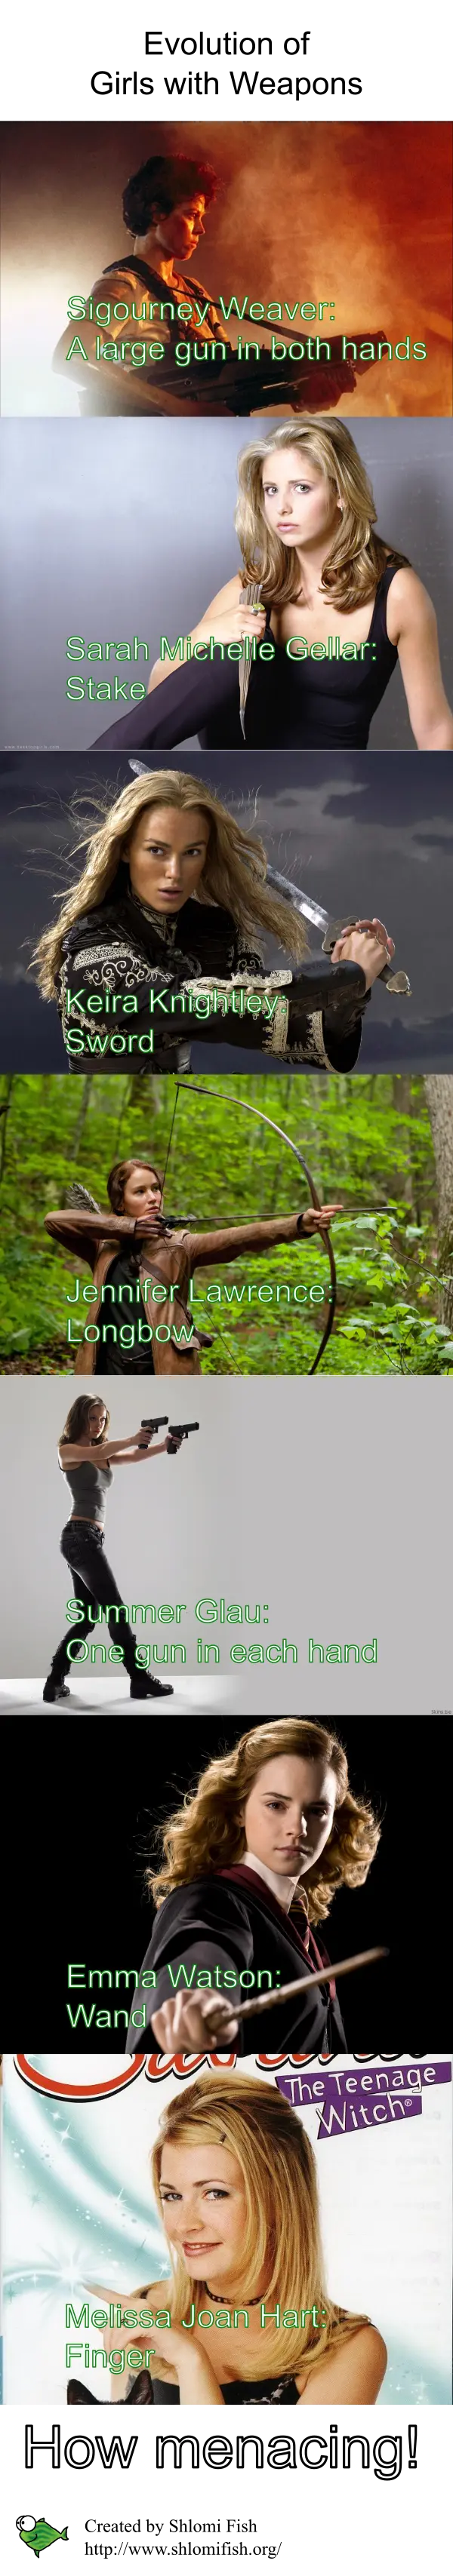 Evolution of Girls with Weapons